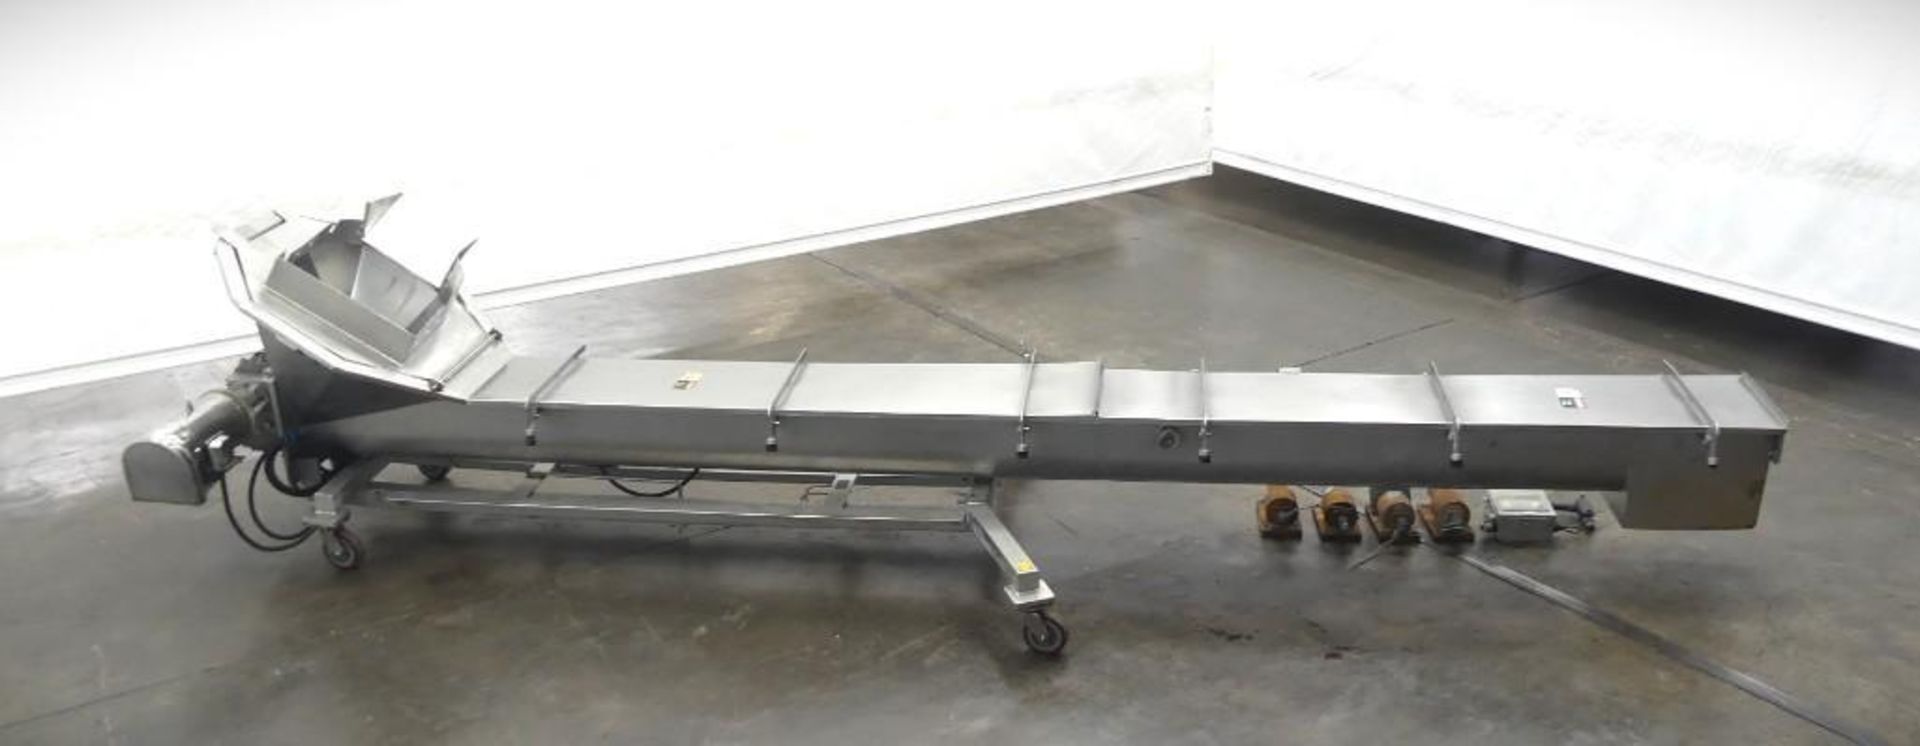 SS Trough Auger Conveyer 217"Long x 70" Wide - Image 4 of 15